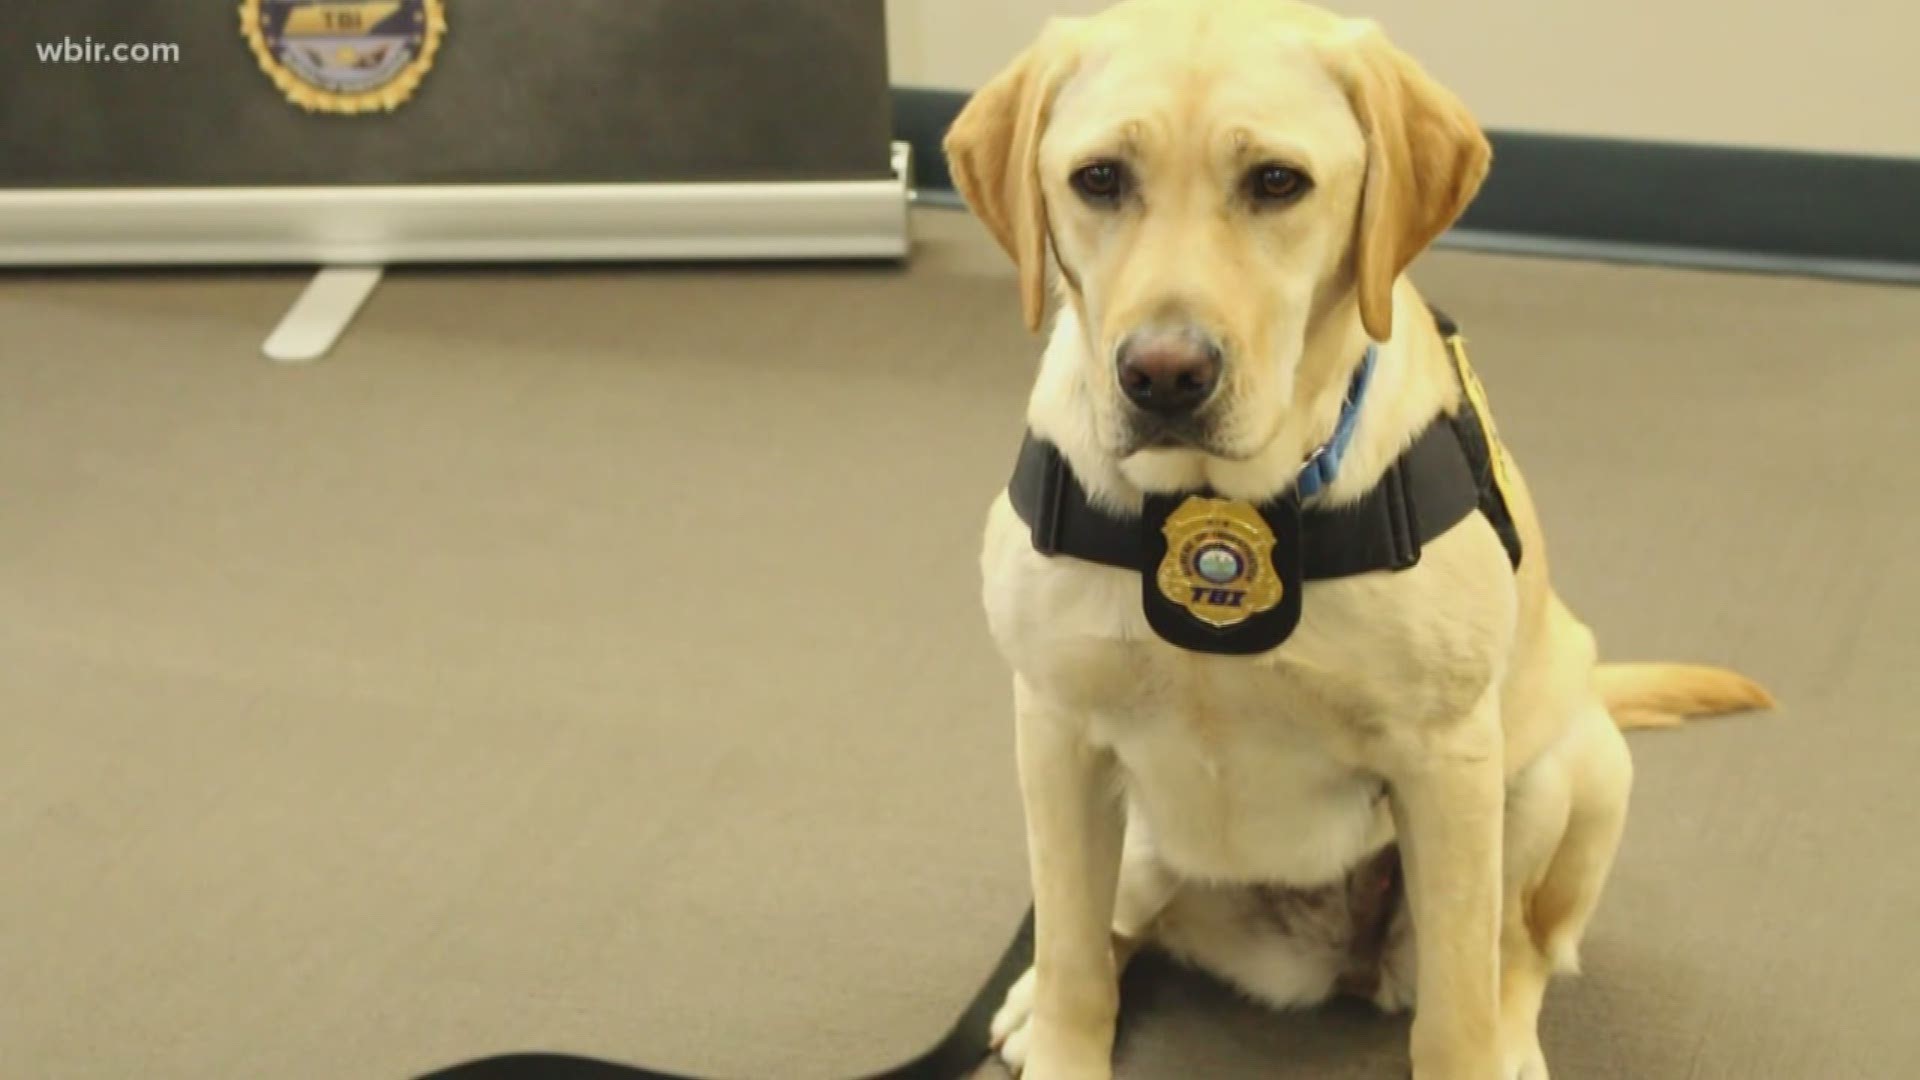 Faith is the TBI's arson dog. She goes to fires the TBI thinks might have been set on purpose and smells to see if there are traces of chemicals like lighter fluid.